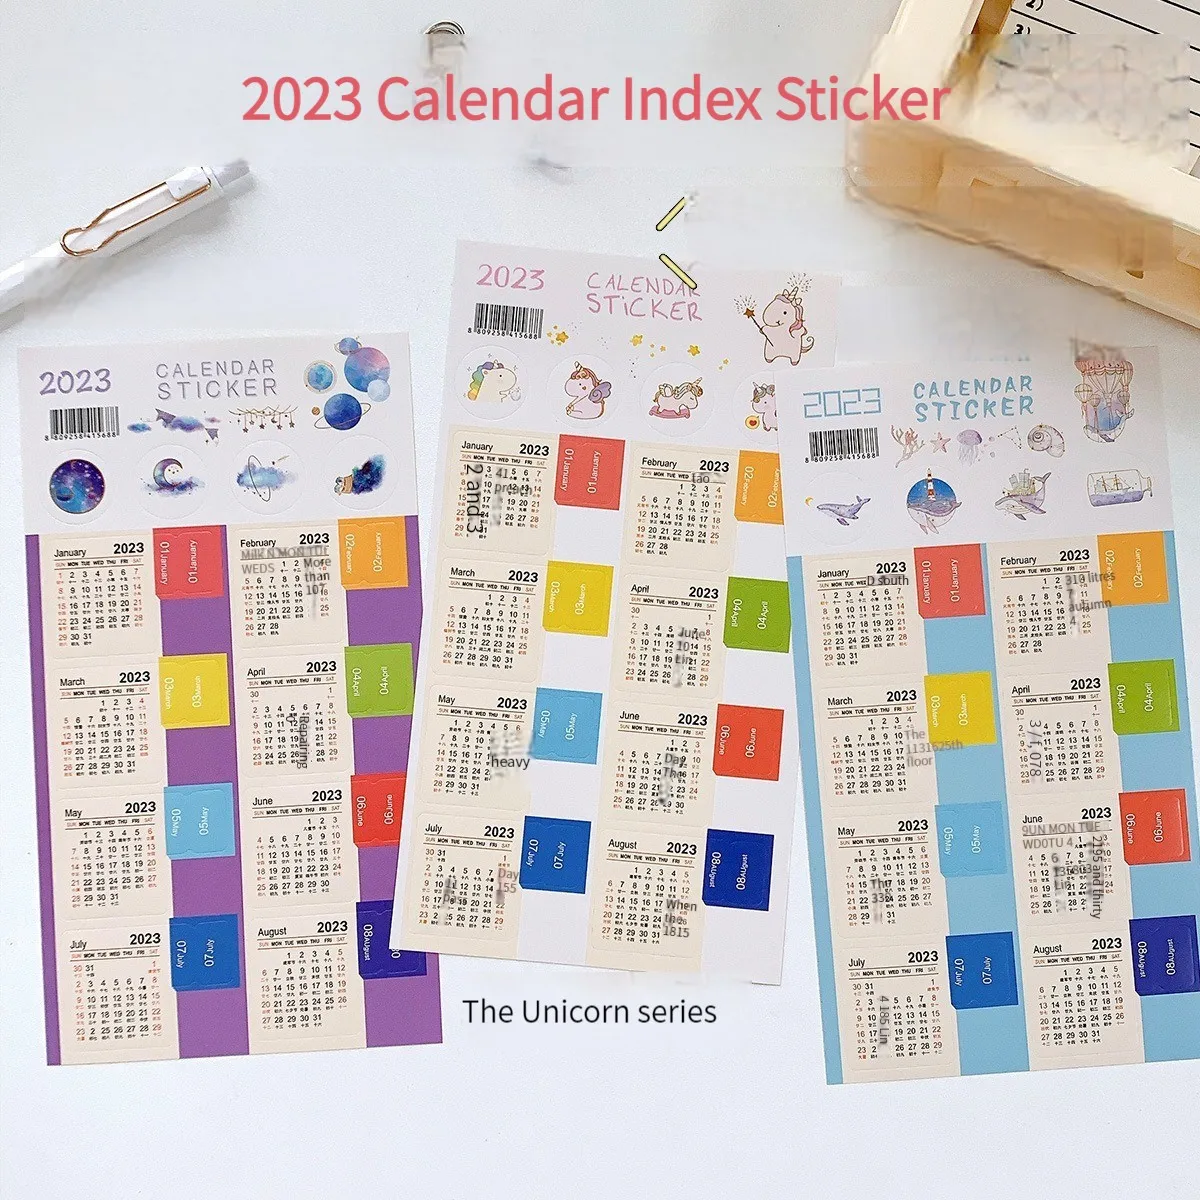 2Pcs/lot 2023 New Year Monthly Calendar Time Index Stickers Decorative Kawaii Stickers for Diary Planner Notebooks Stationery 2pcs lot 2023 new year monthly calendar time index stickers decorative kawaii stickers for diary planner notebooks stationery